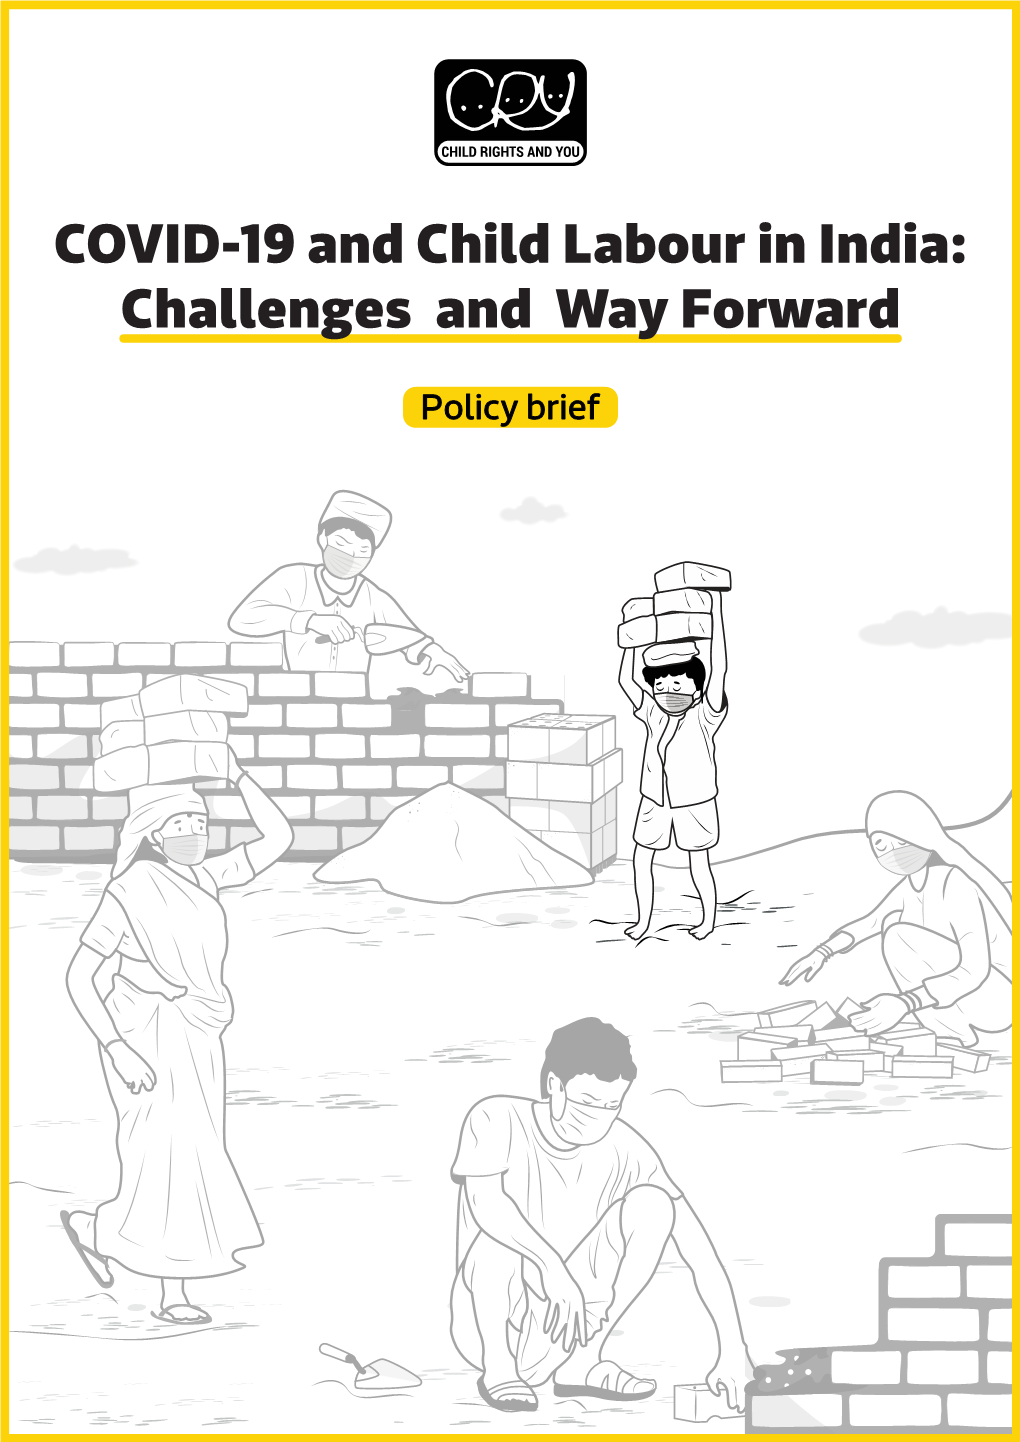 Child Labour in India: Challenges and Way Forward